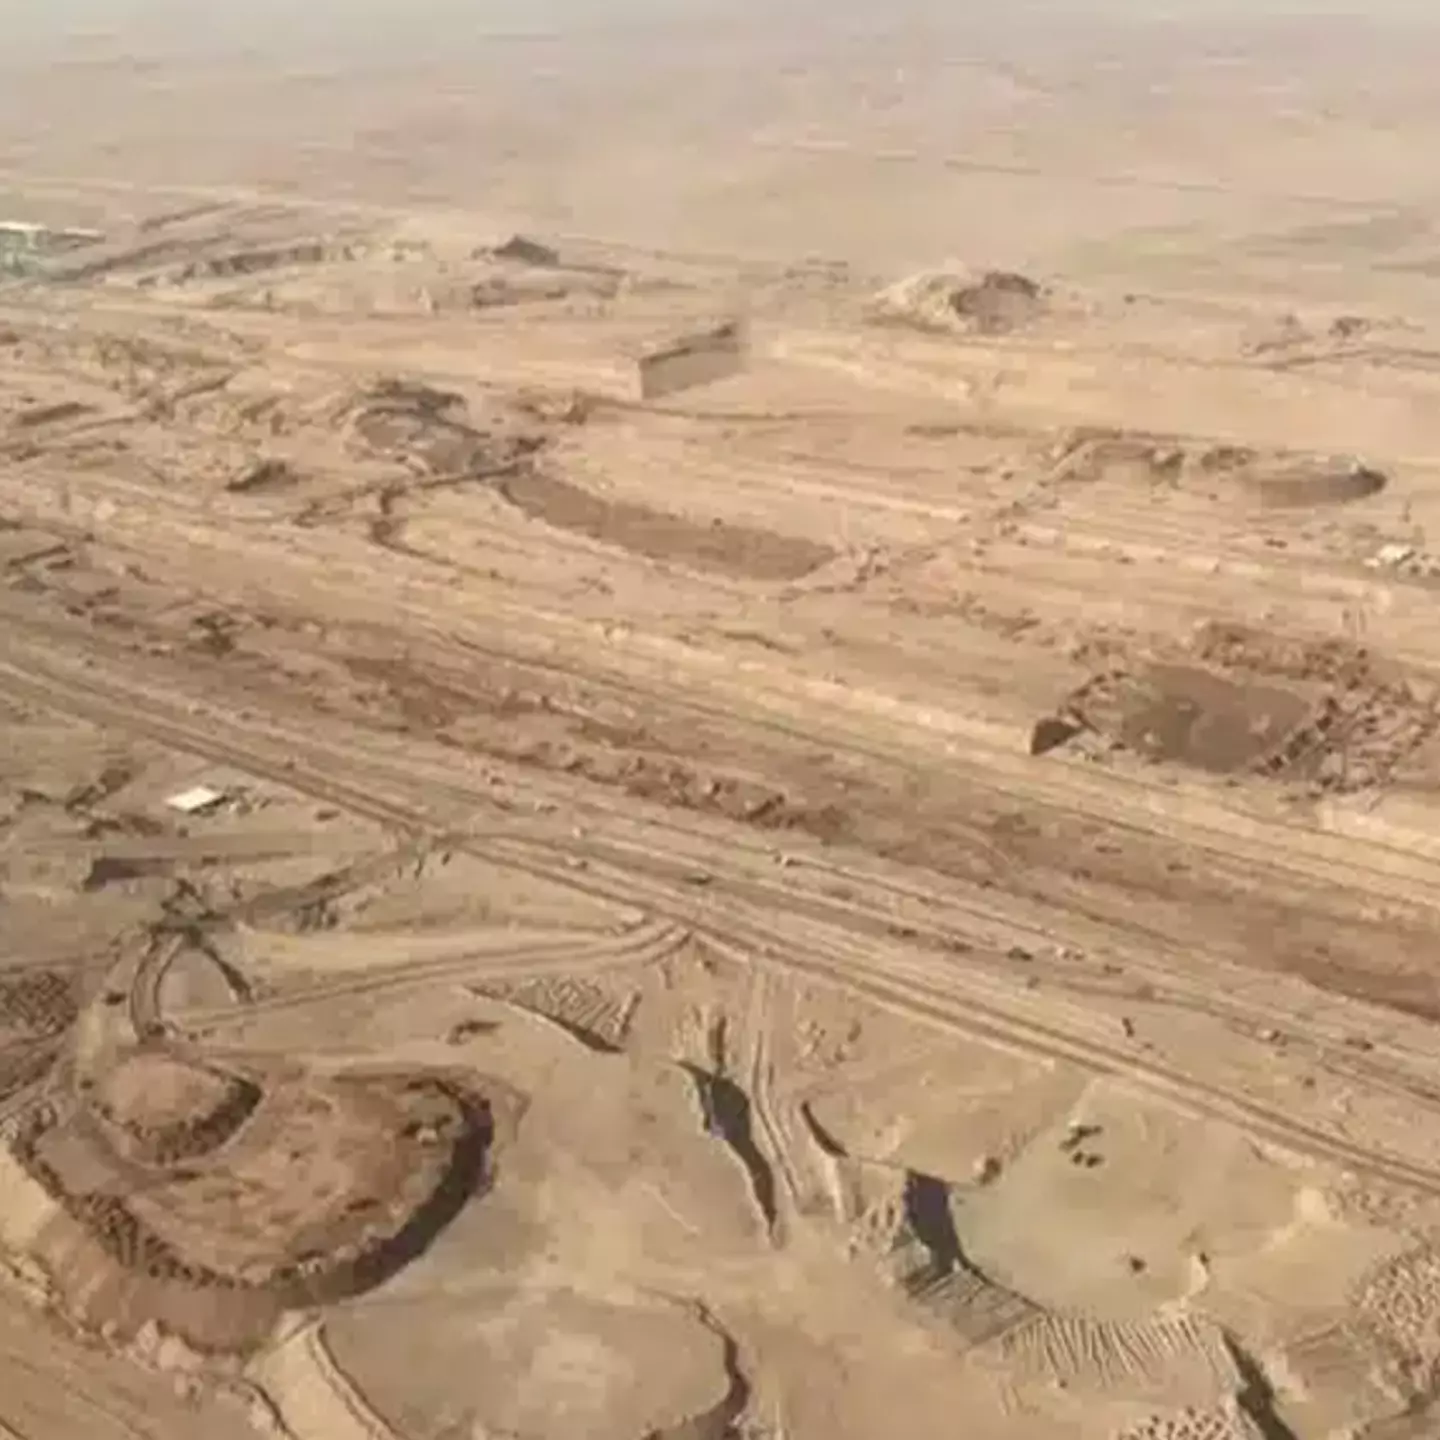 Aerial footage shows insane progress and scale of Saudi Arabia’s $1 trillion giga-project ‘The Line’